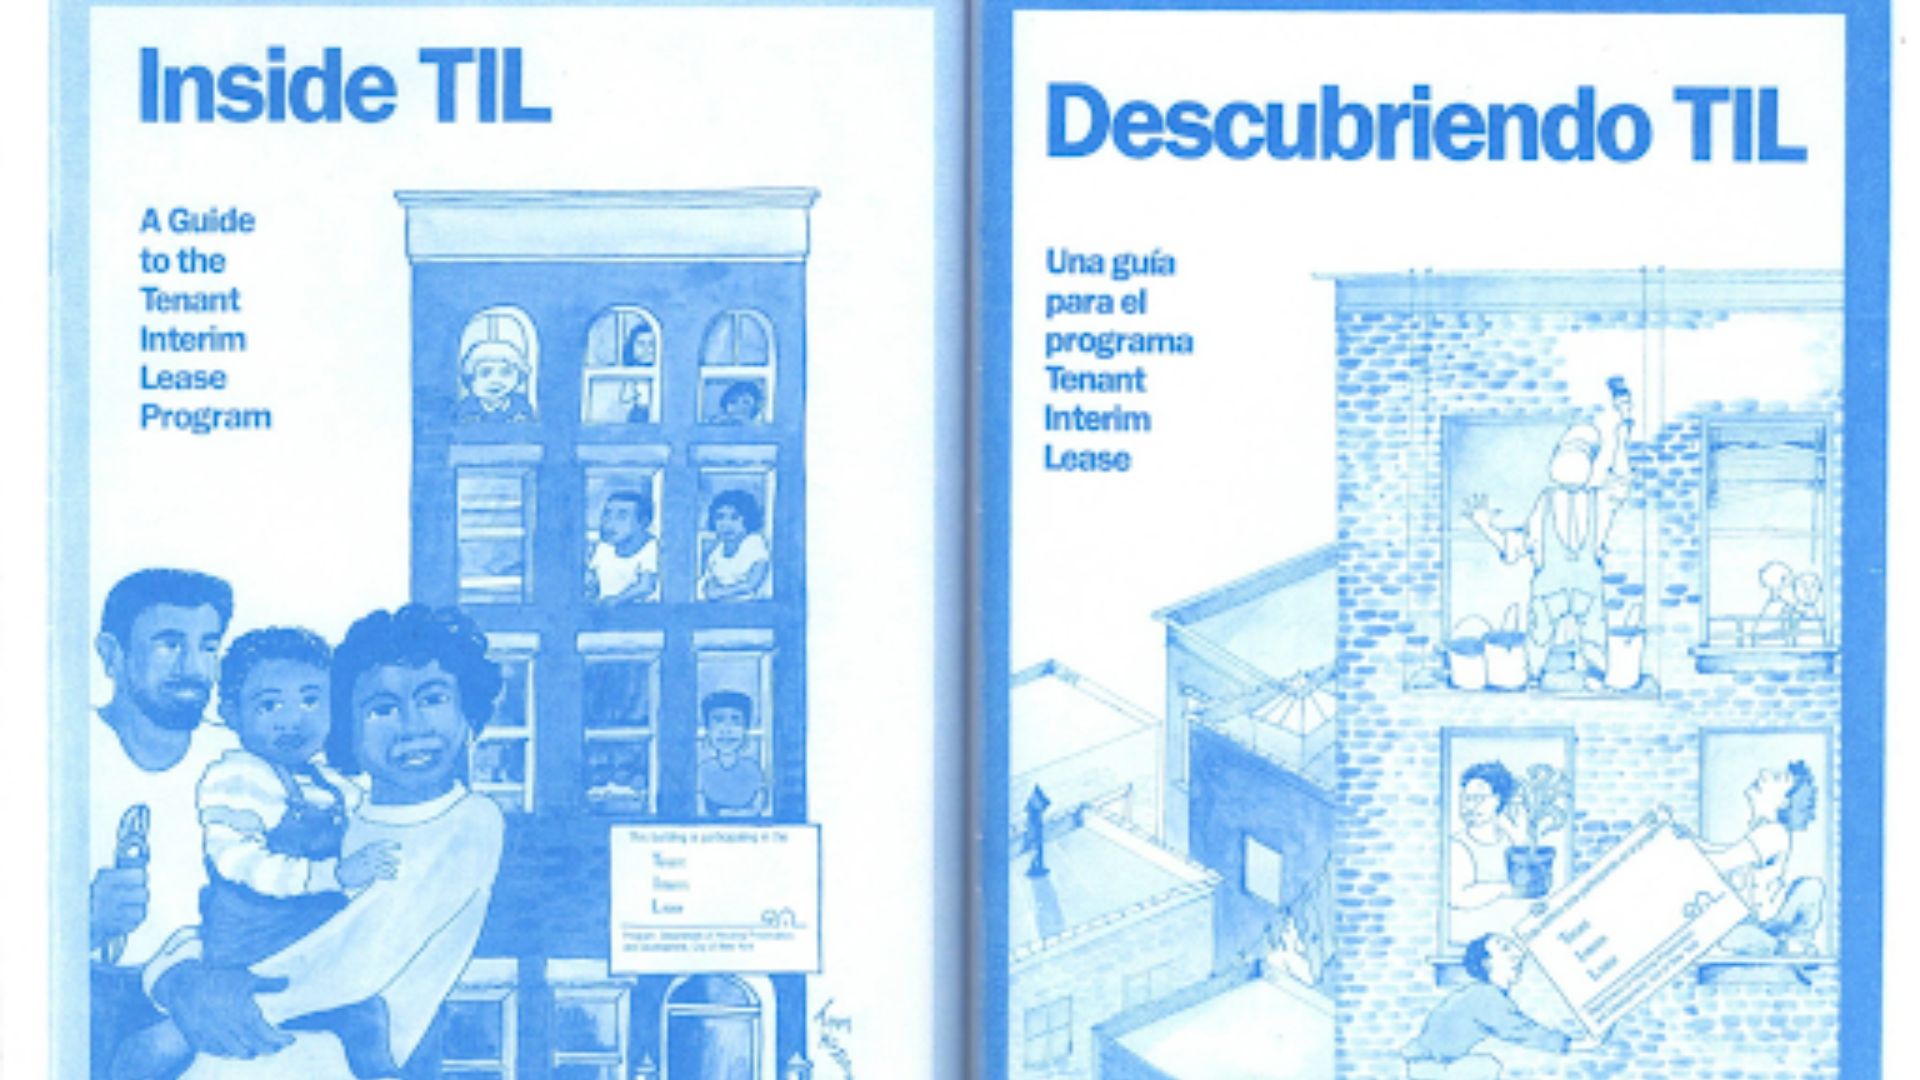 Cover of a Blue pamphlet in English and Spanish “Inside /Descubriendo TIL” with drawings of people working to repair their building and smiling from their windows.